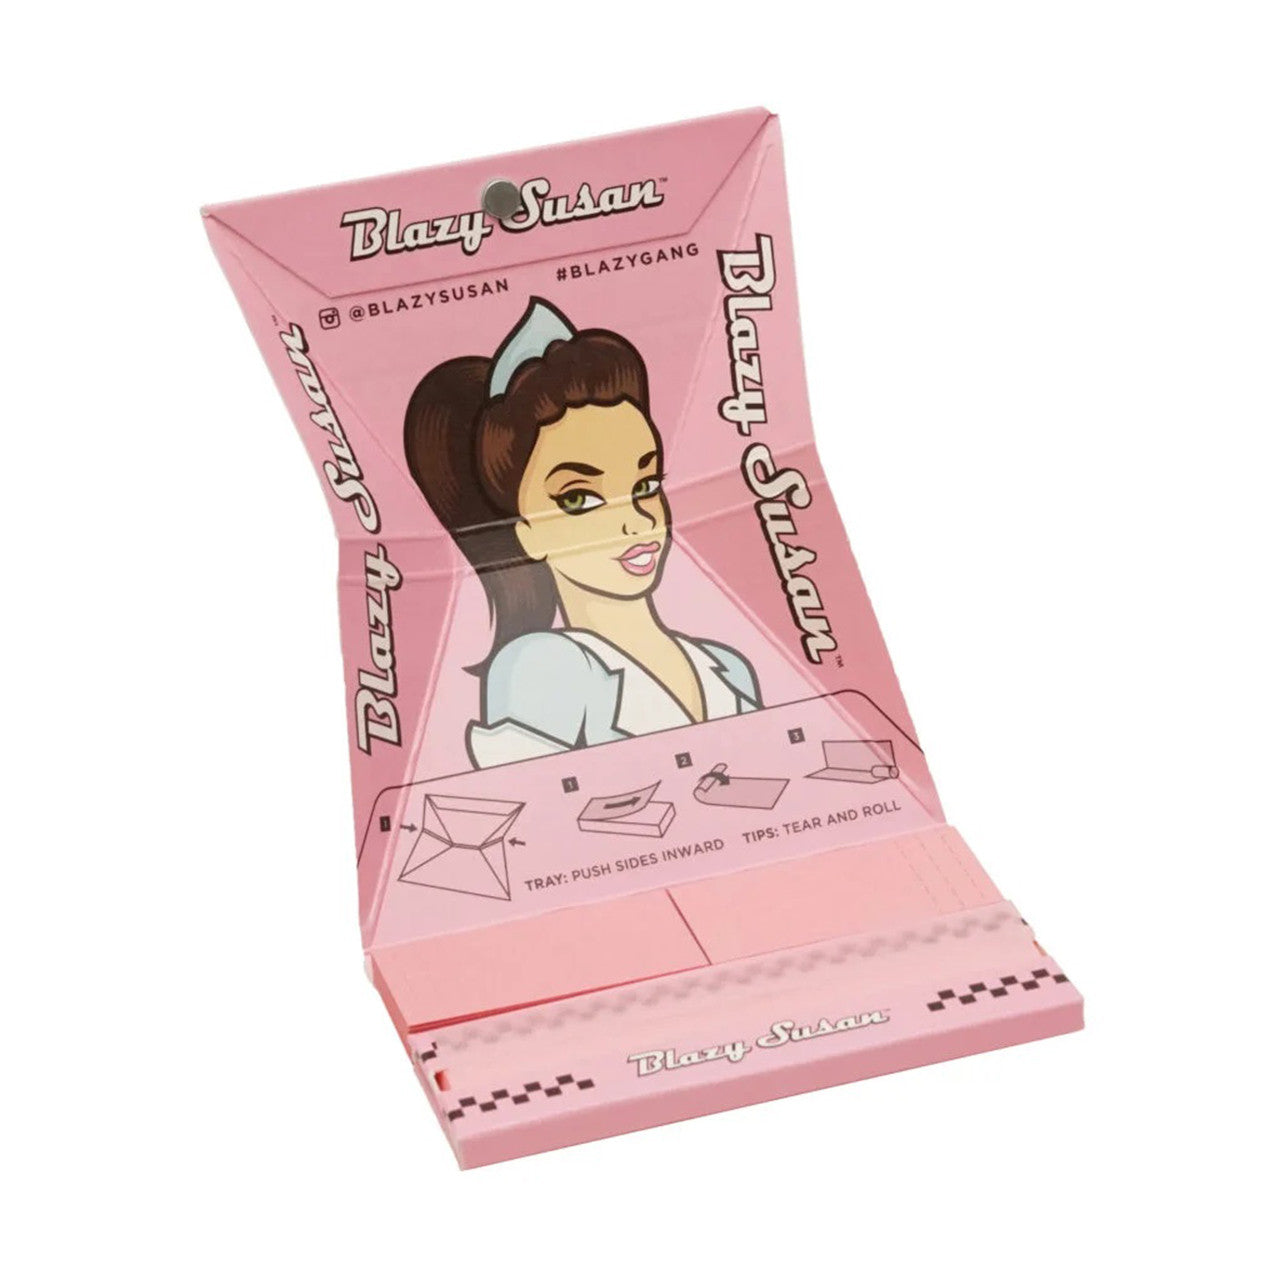 Blazy Susan Pink 1¼ Rolling Papers Deluxe Rolling Kit